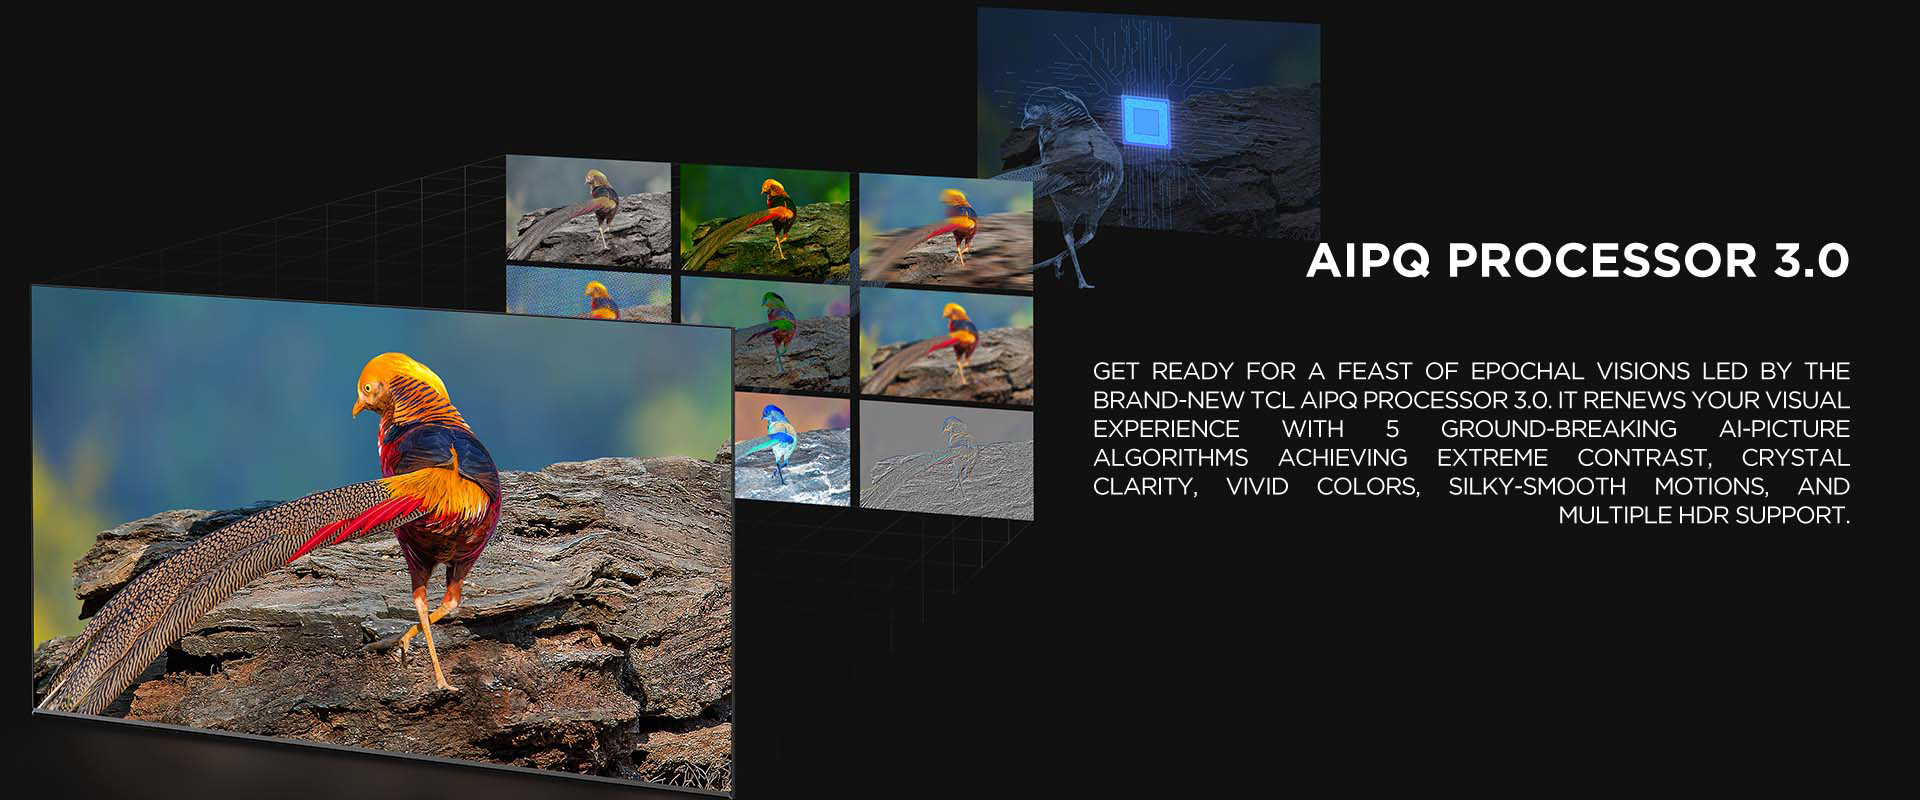 AiPQ PROCESSOR 3.0 - Get ready for a feast of epochal visions led by the brand-new TCL AiPQ Processor 3.0. It renews your visual experience with 5 ground-breaking Ai-Picture algorithms achieving extreme contrast, crystal clarity, vivid colors, silky-smooth motions, and multiple HDR support.